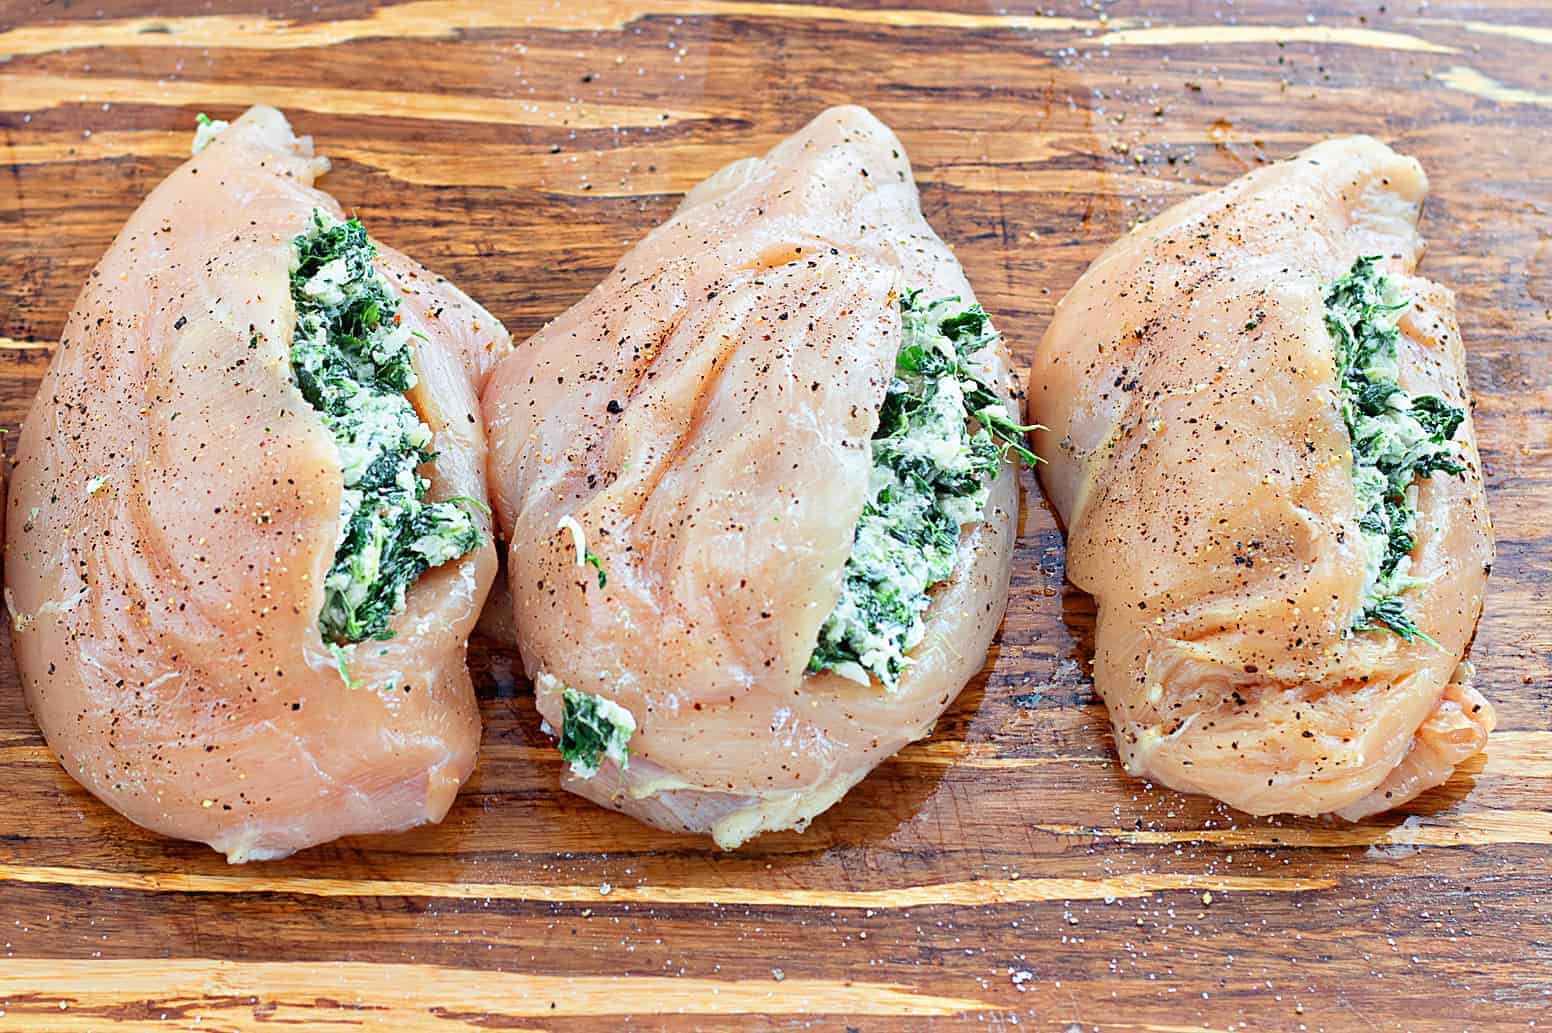 Spinach Stuffed Chicken ready to be cooked